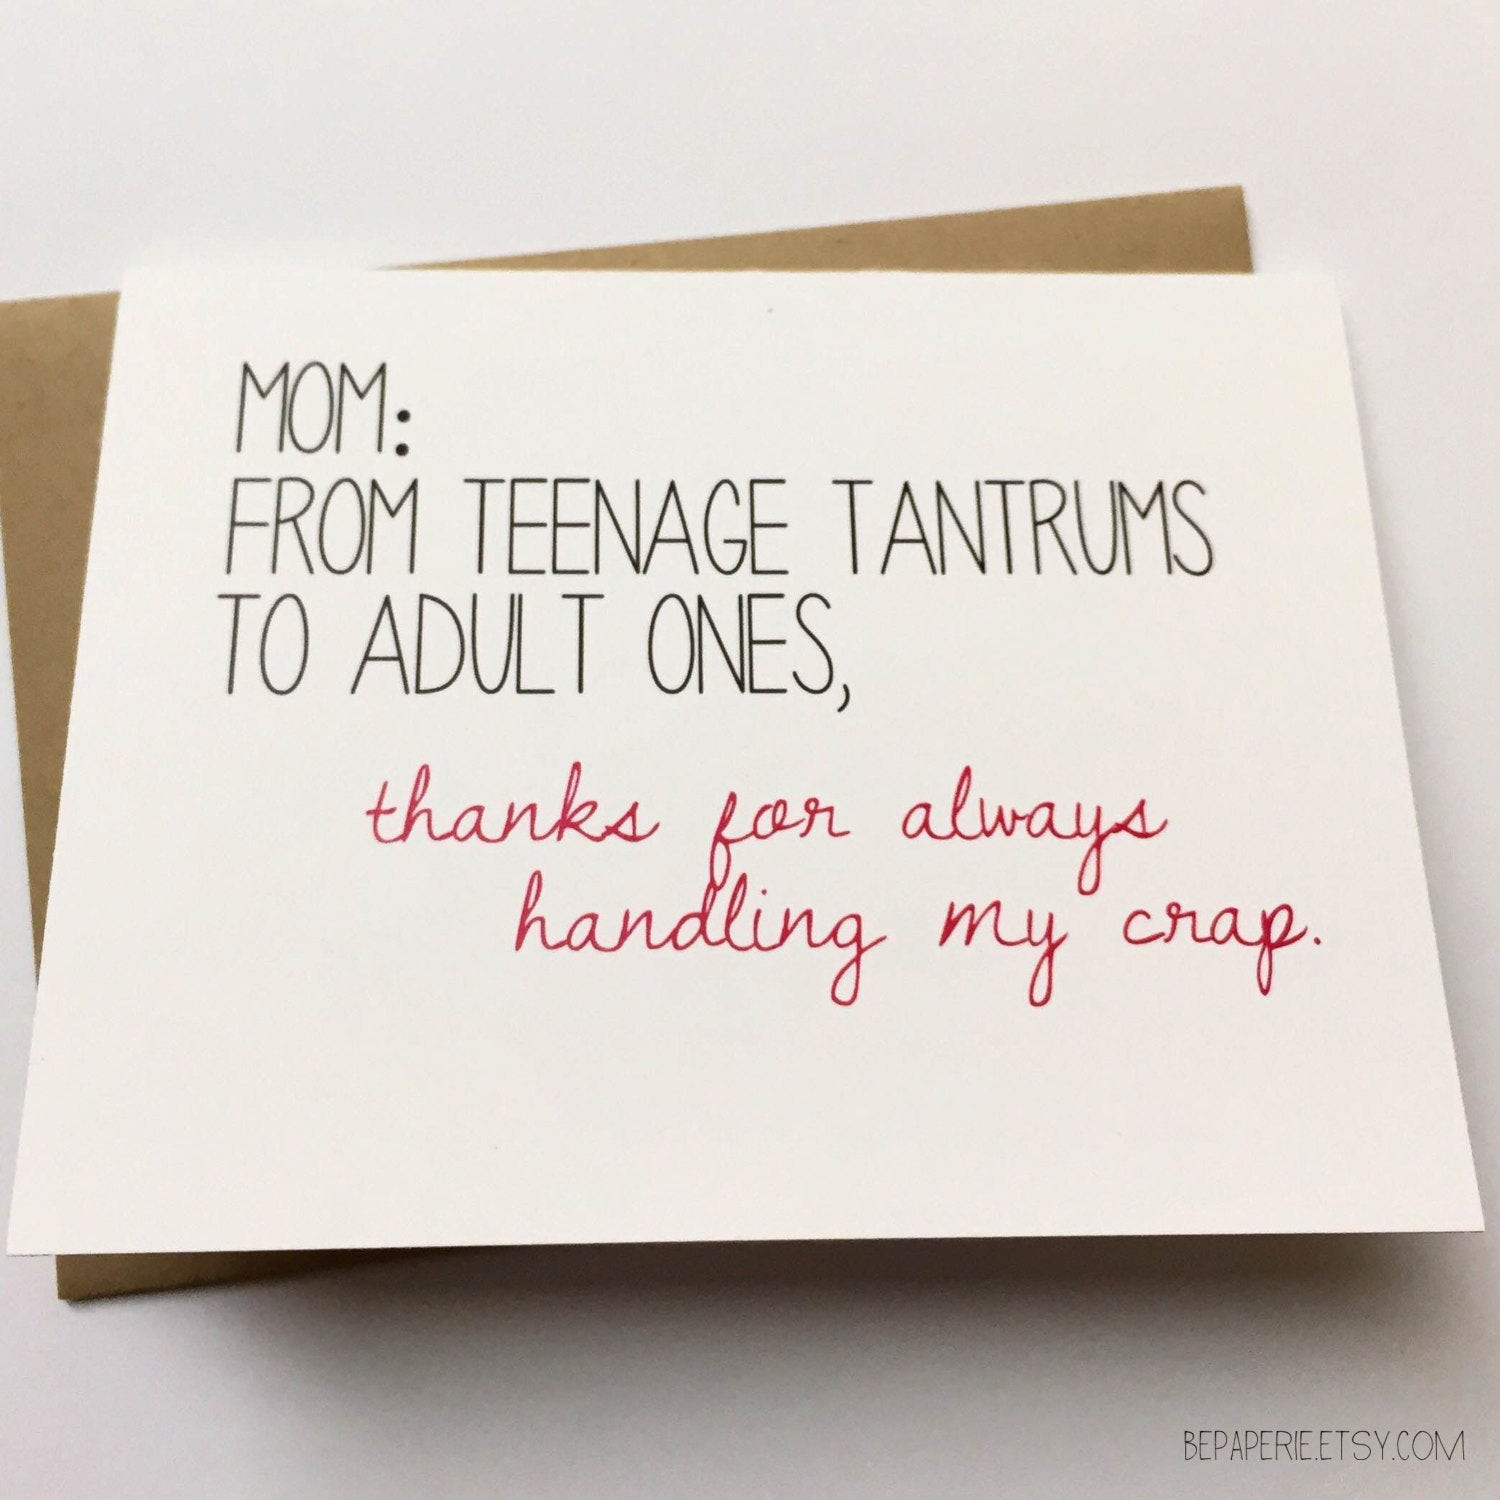 Funny Birthday Cards For Mom
 Mom Card Funny Card for Mom Mom Birthday Card Funny